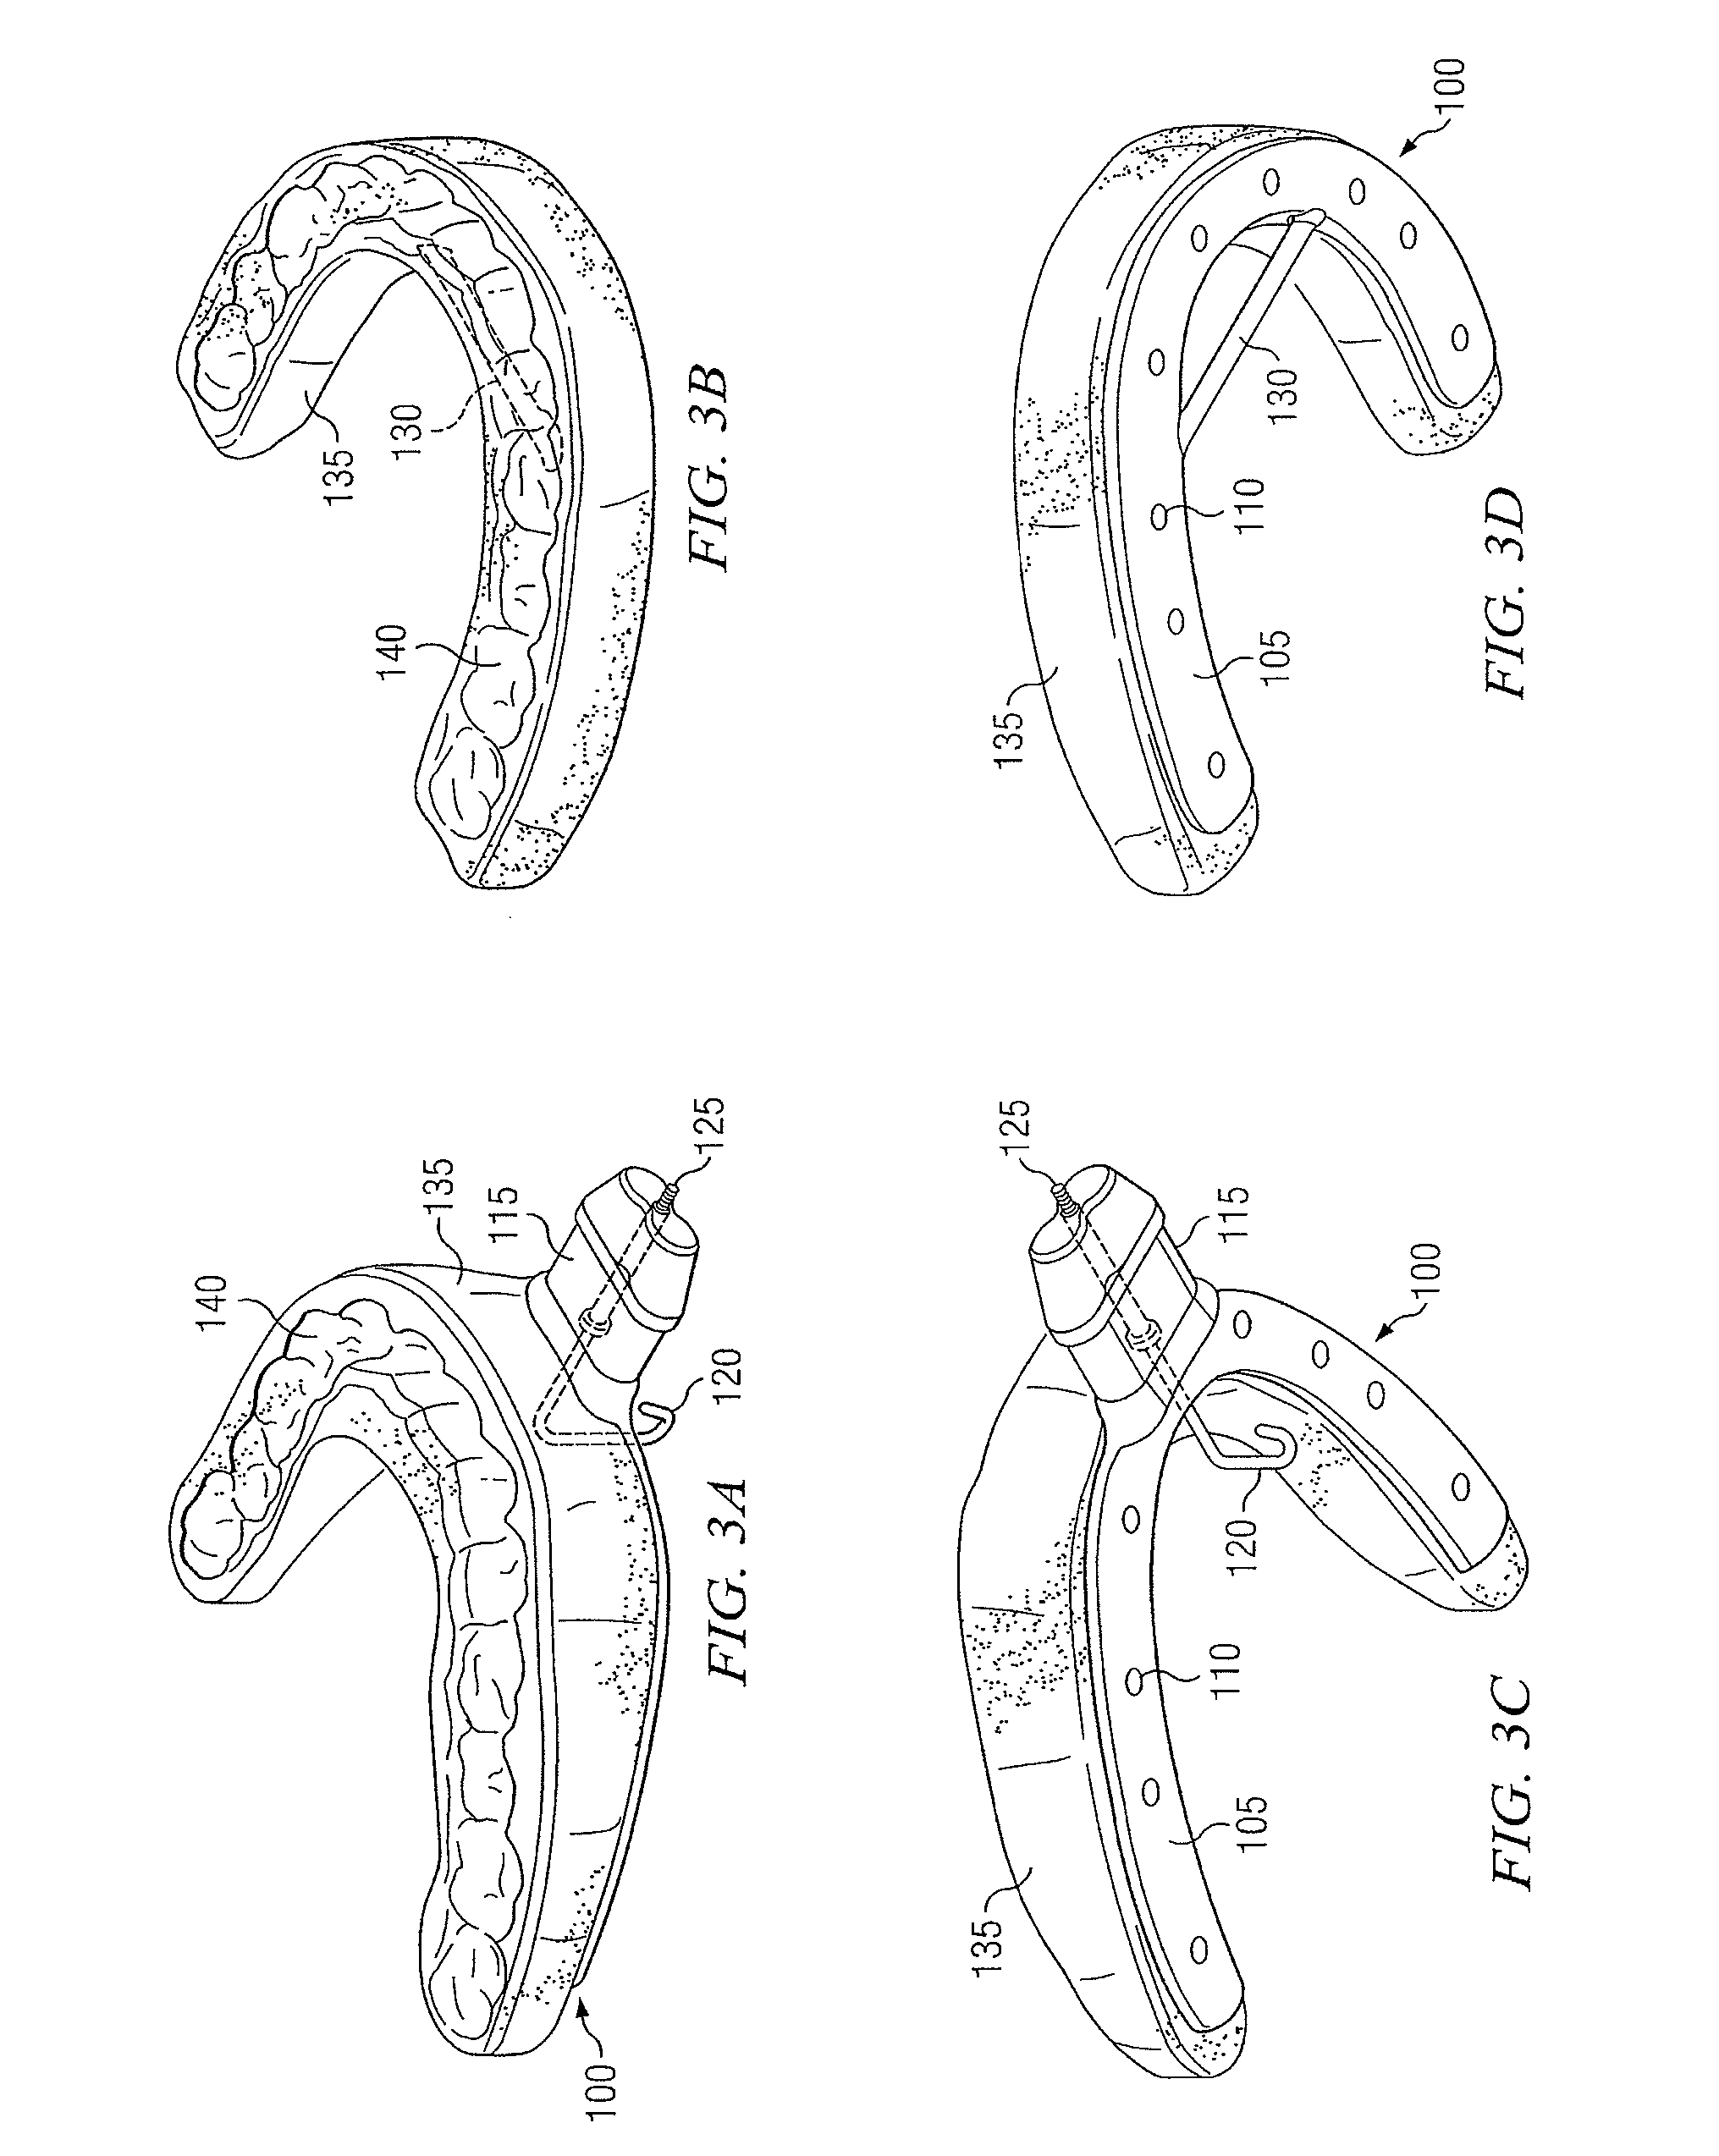 Apparatus for prevention of snoring and improved breathing